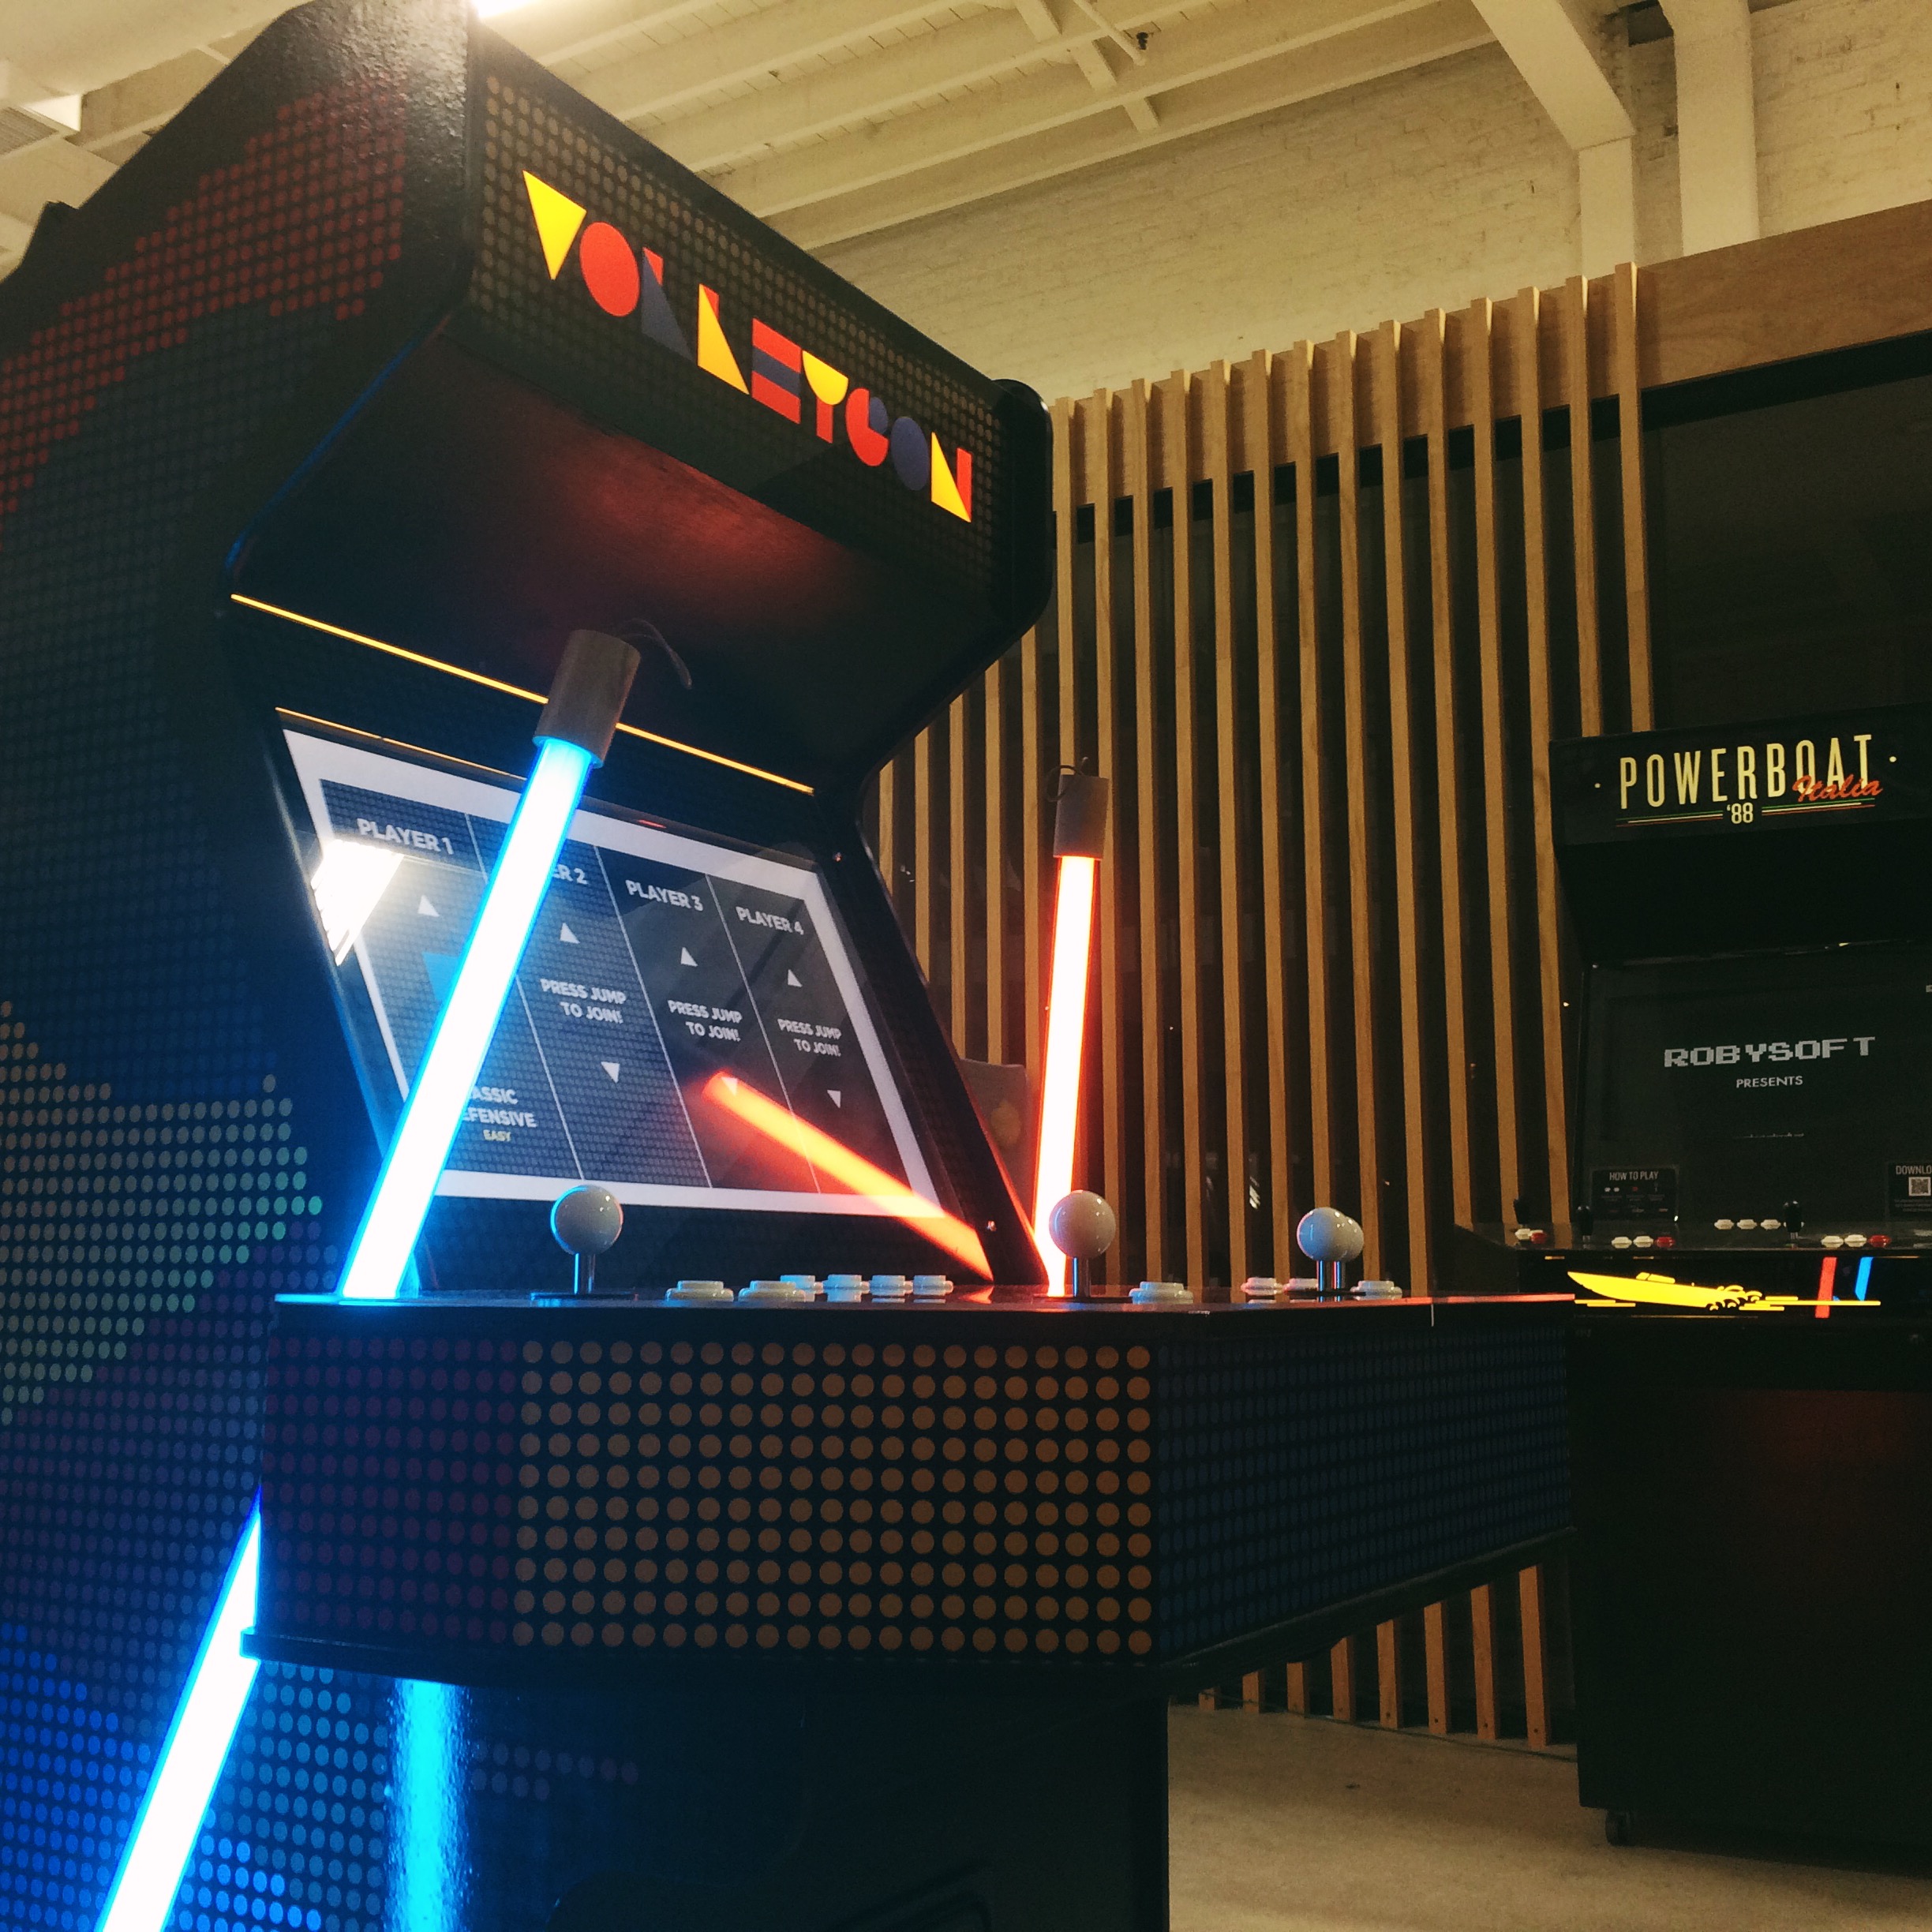 VOLLEYGON Is An Arcade Cabinet That Wants To Bring People Together 